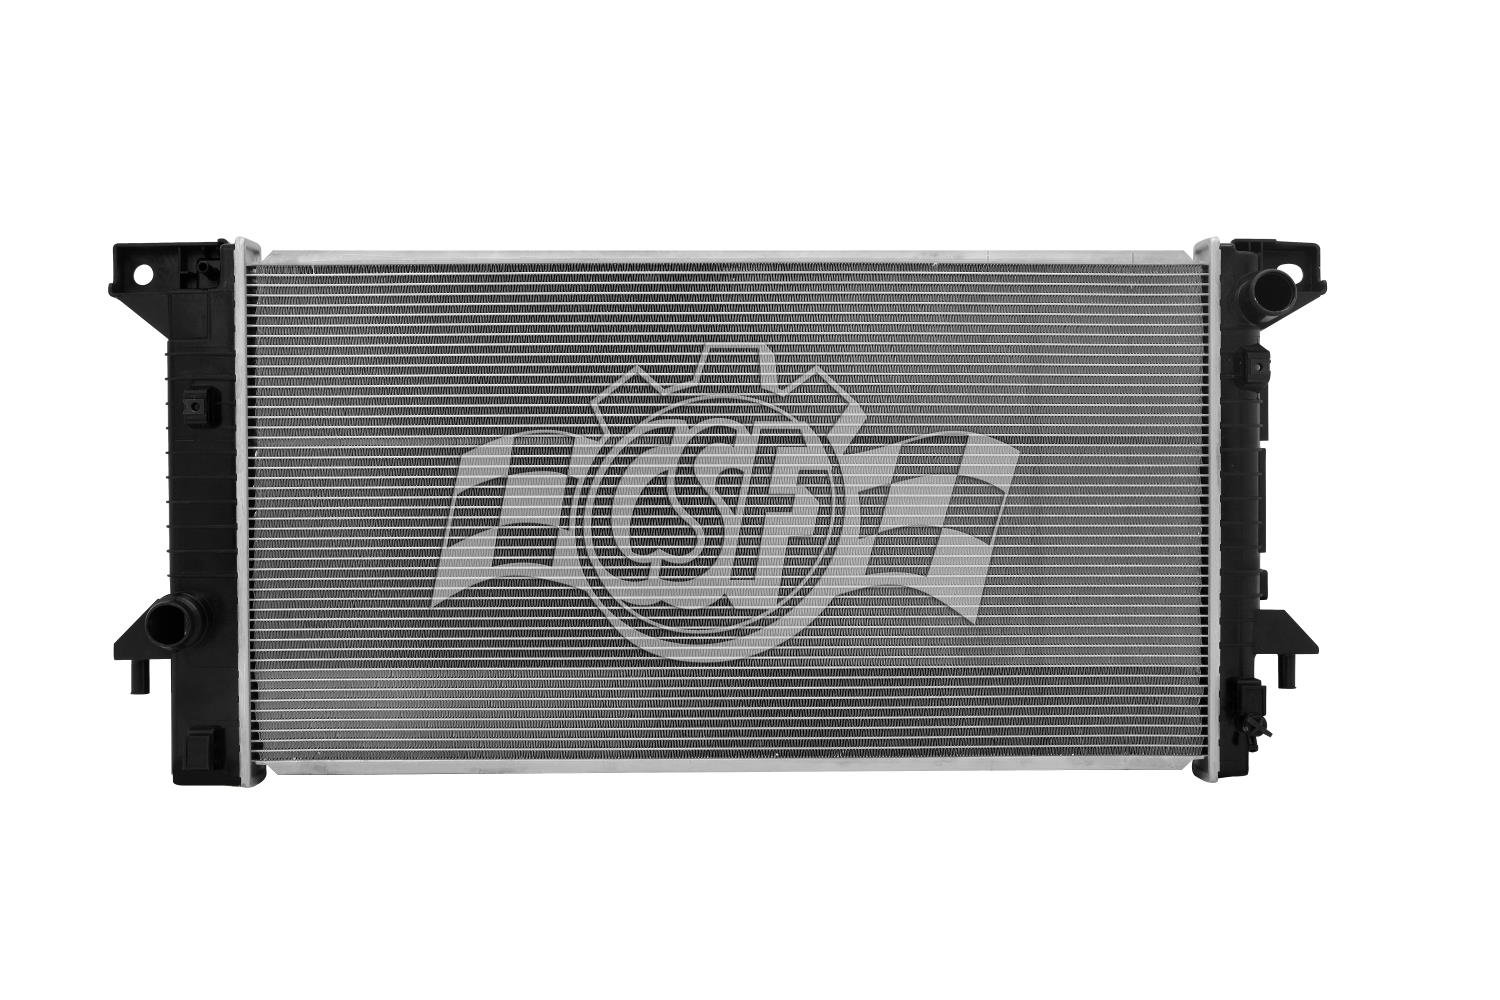 OE-Style 1-Row Radiator, Lincoln Navigator, Ford Expedition, Ford